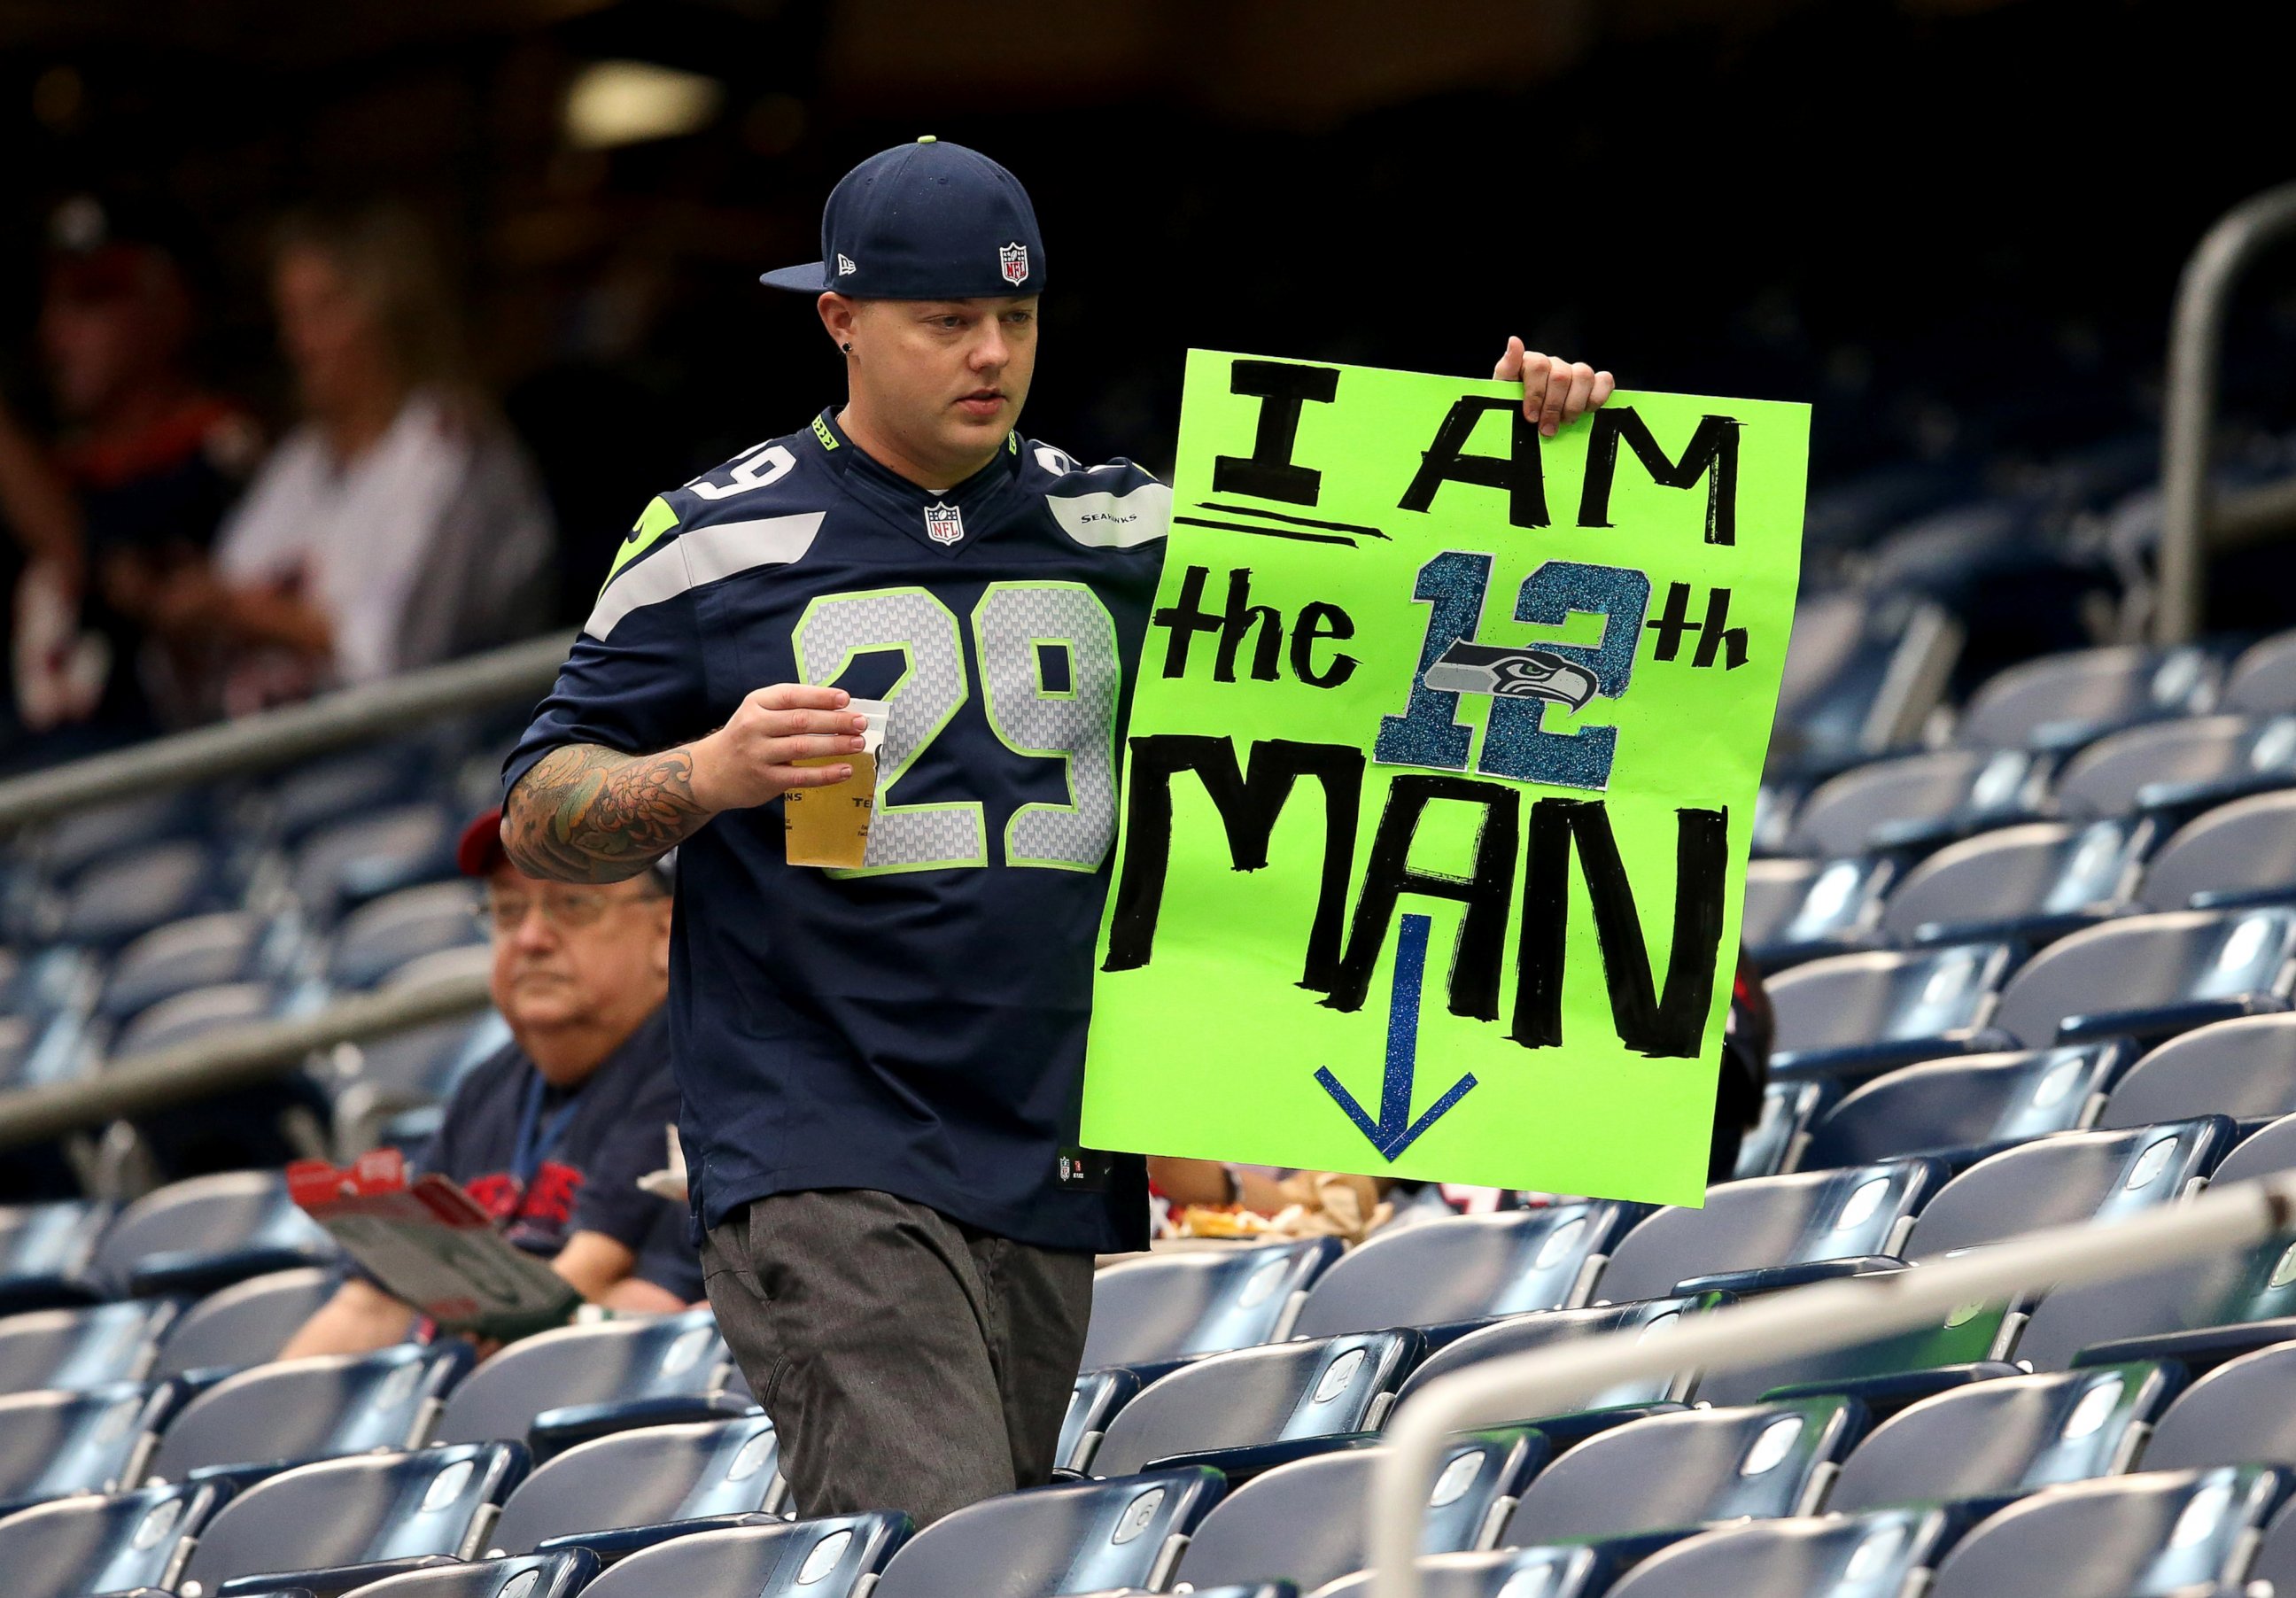 PHOTO: Seattle Seahawks fan displays his 12th man sign prior to the game against the Houston Texans at Reliant Stadium, Sept. 29, 2013, in Houston.